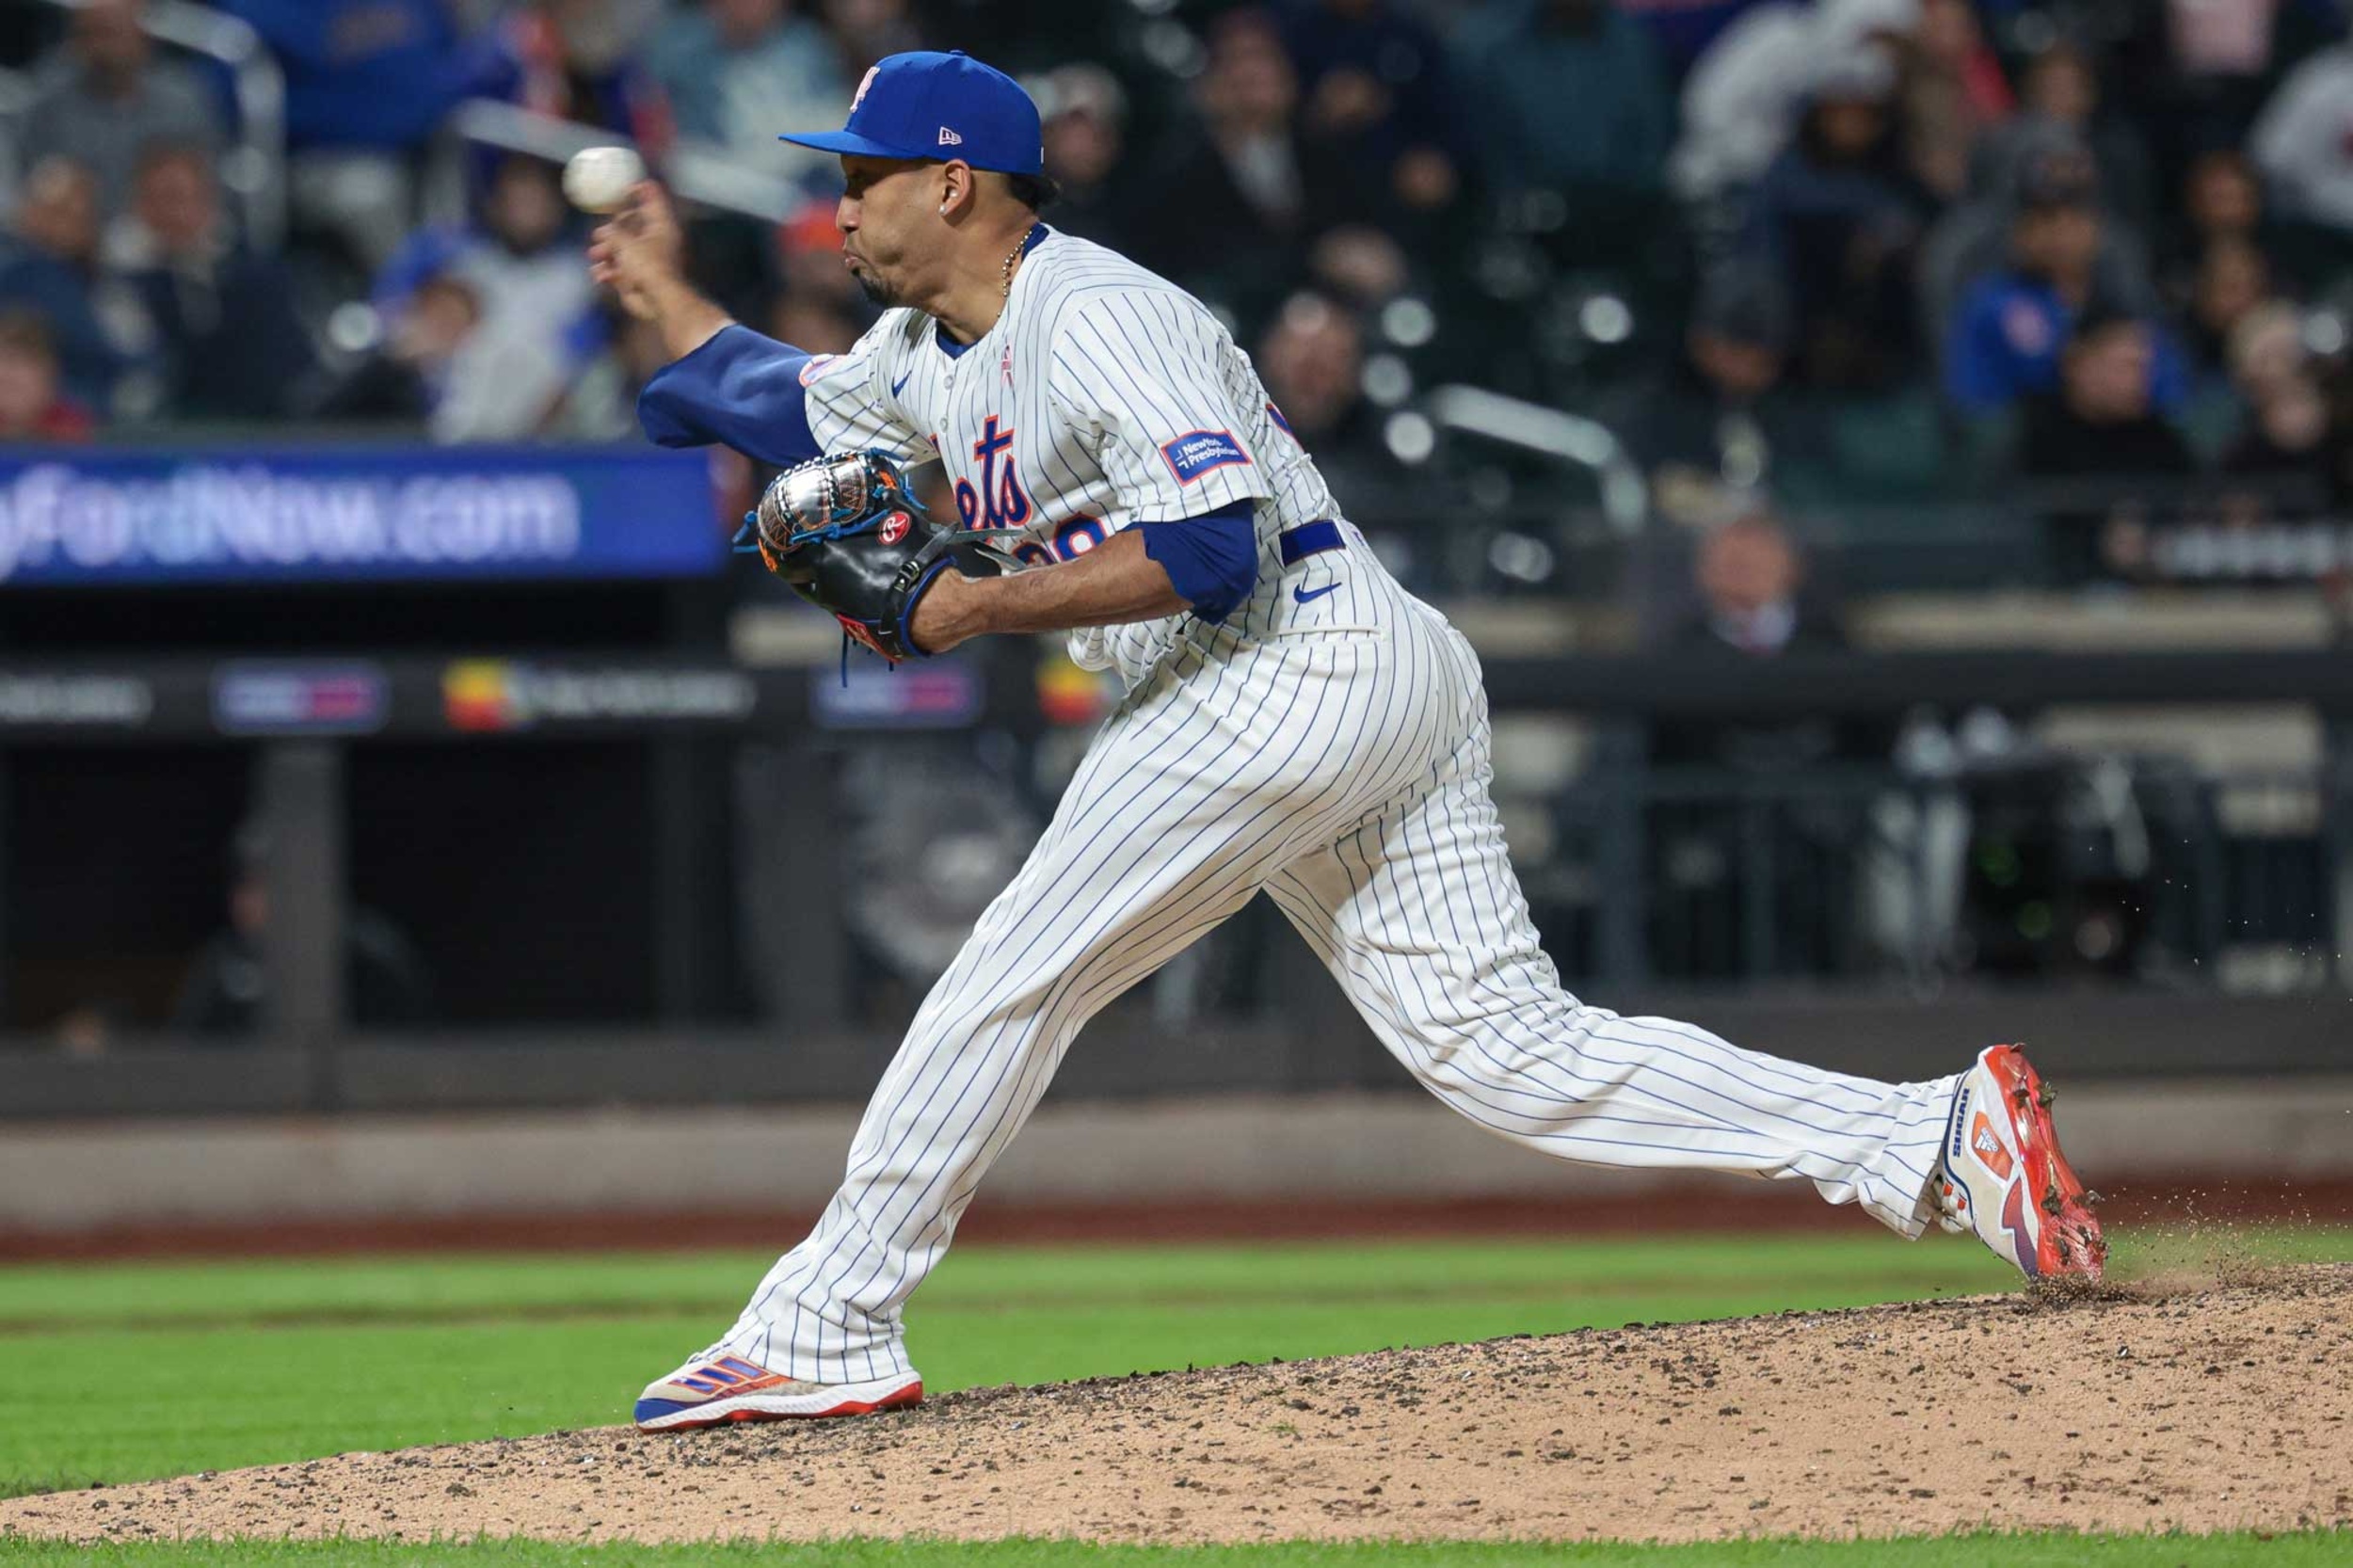 <p>Returning from knee surgery and a lost season, the Mets were hopeful Diaz would rebound easily. His velocity was down to begin the season, resulting in a 5.40 ERA and five home runs allowed in 20 innings before going on the IL with a shoulder injury.</p><p><a href='https://www.msn.com/en-us/community/channel/vid-cj9pqbr0vn9in2b6ddcd8sfgpfq6x6utp44fssrv6mc2gtybw0us'>Follow us on MSN to see more of our exclusive MLB content.</a></p>